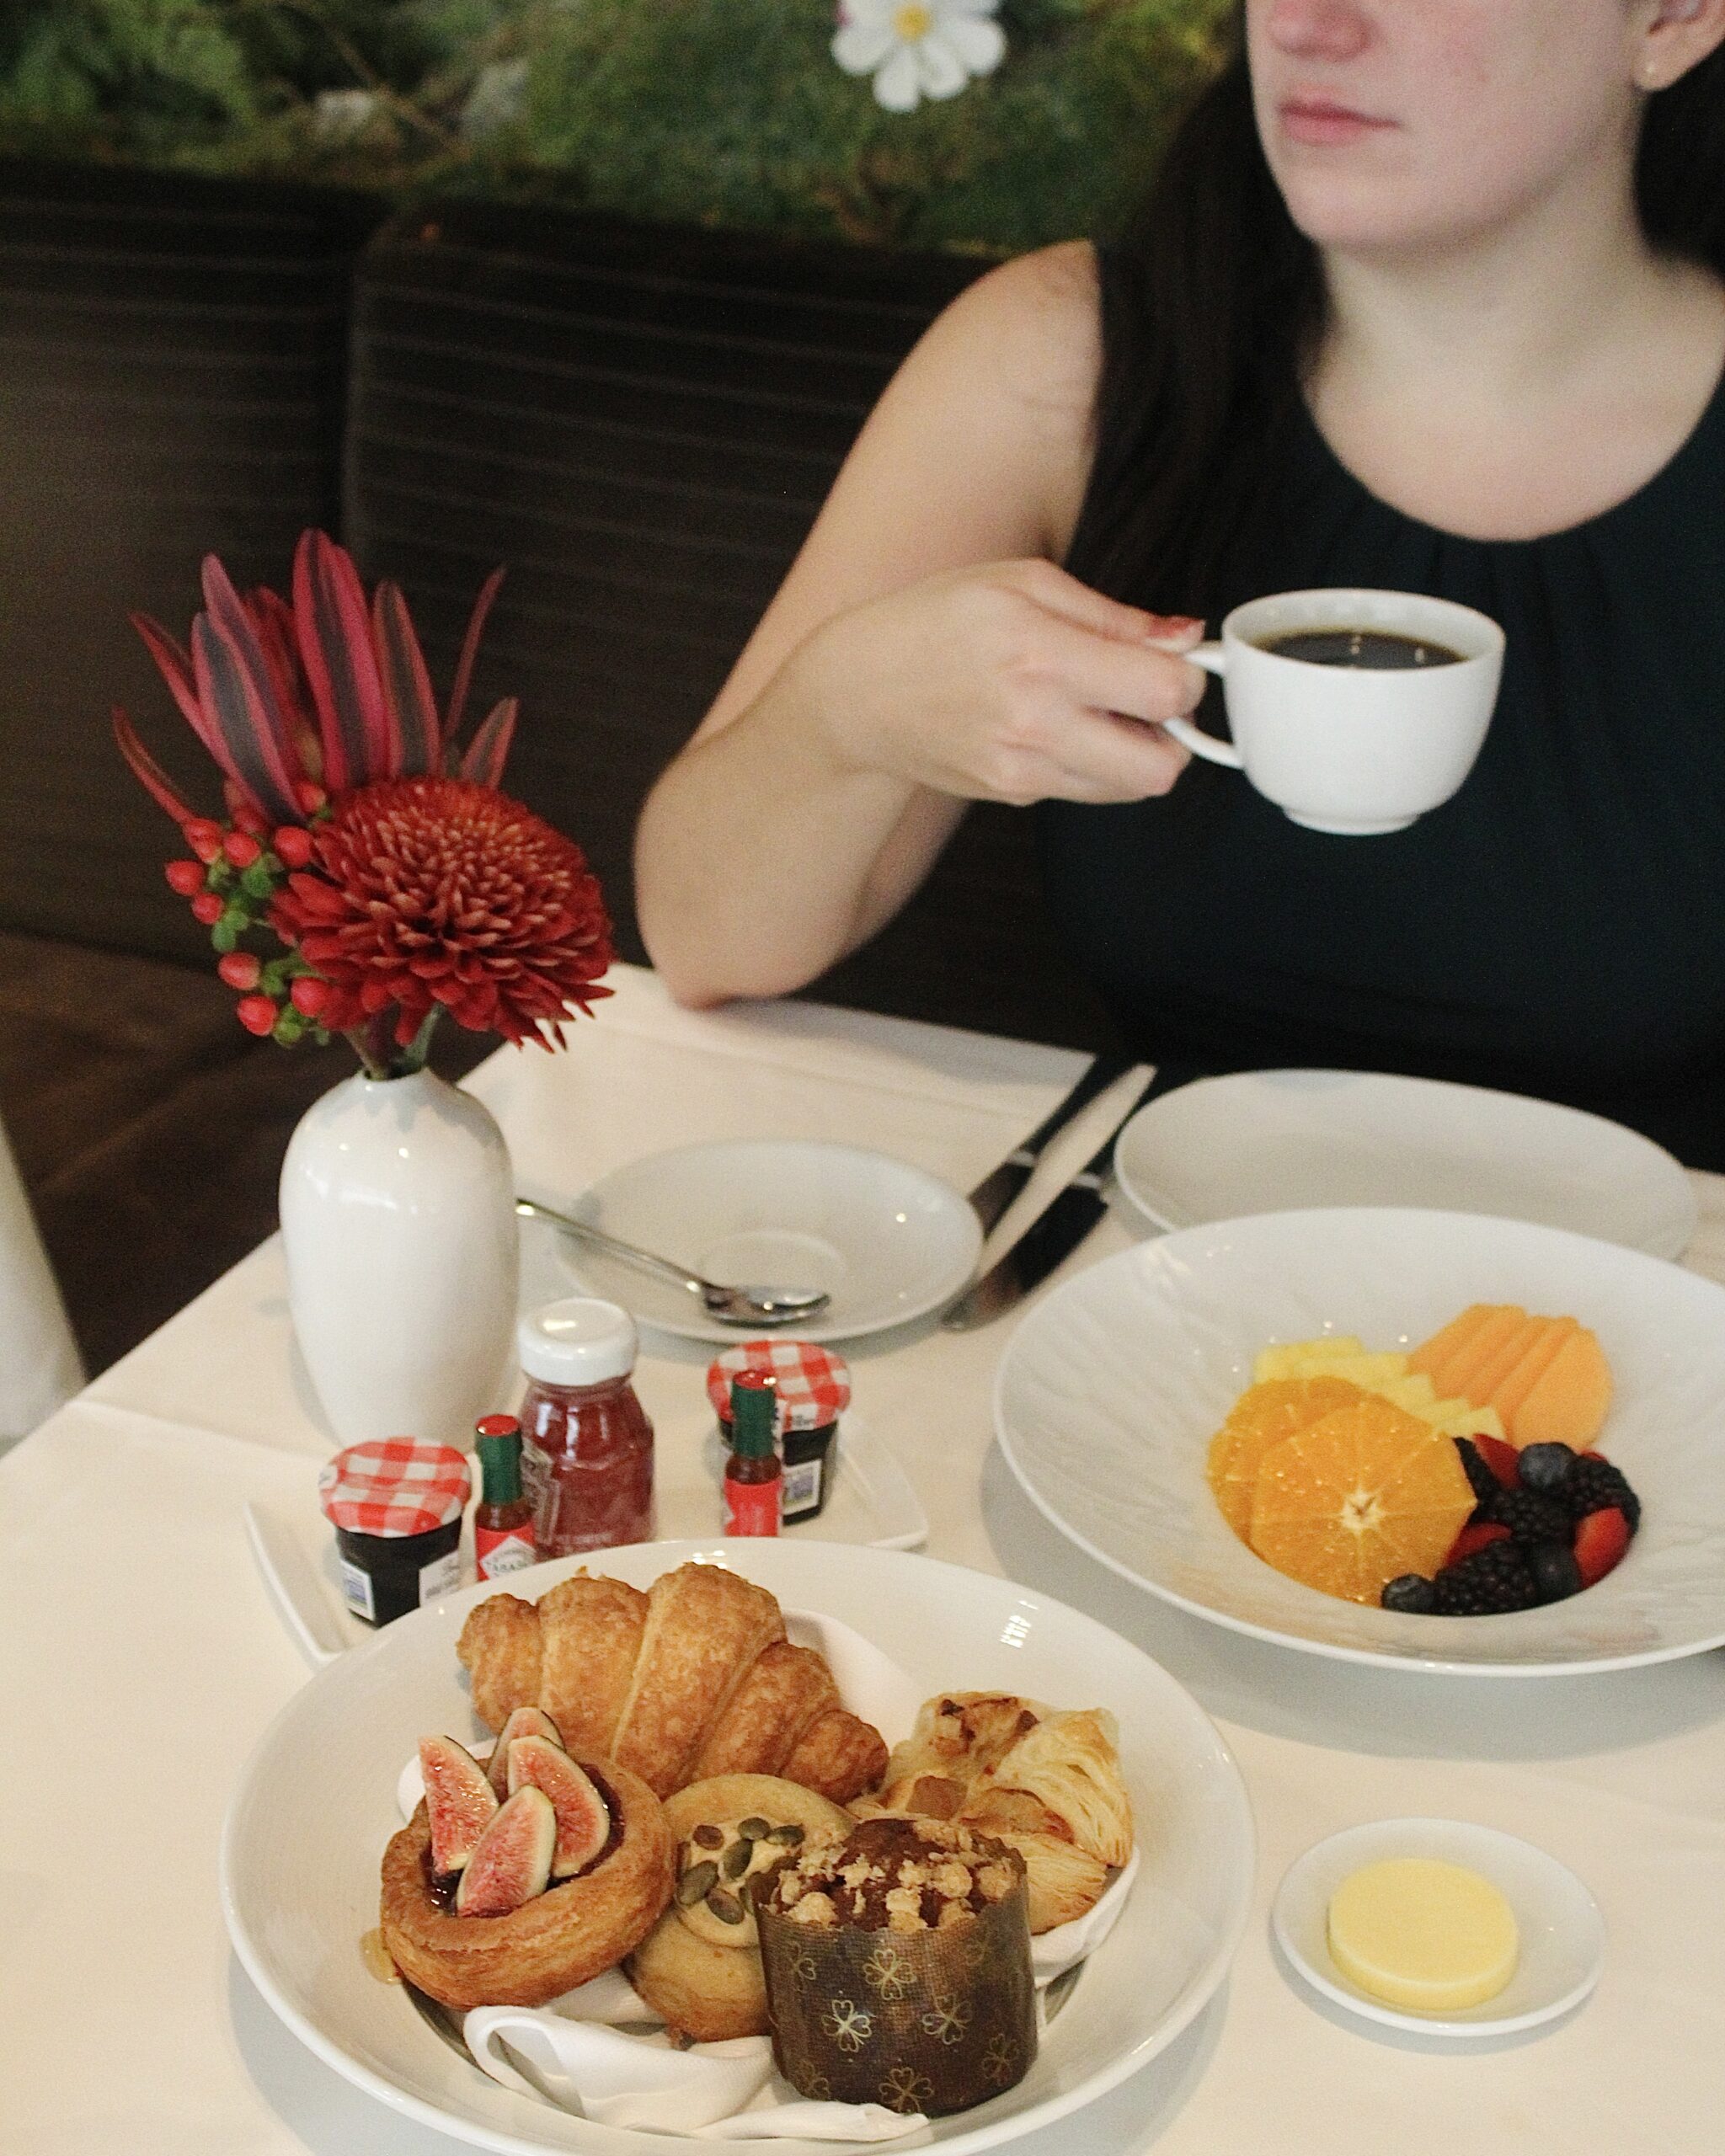 a woman drinks a cup of coffee at a table full of breakfast items: a bowl of fruit and a basket of pastries.